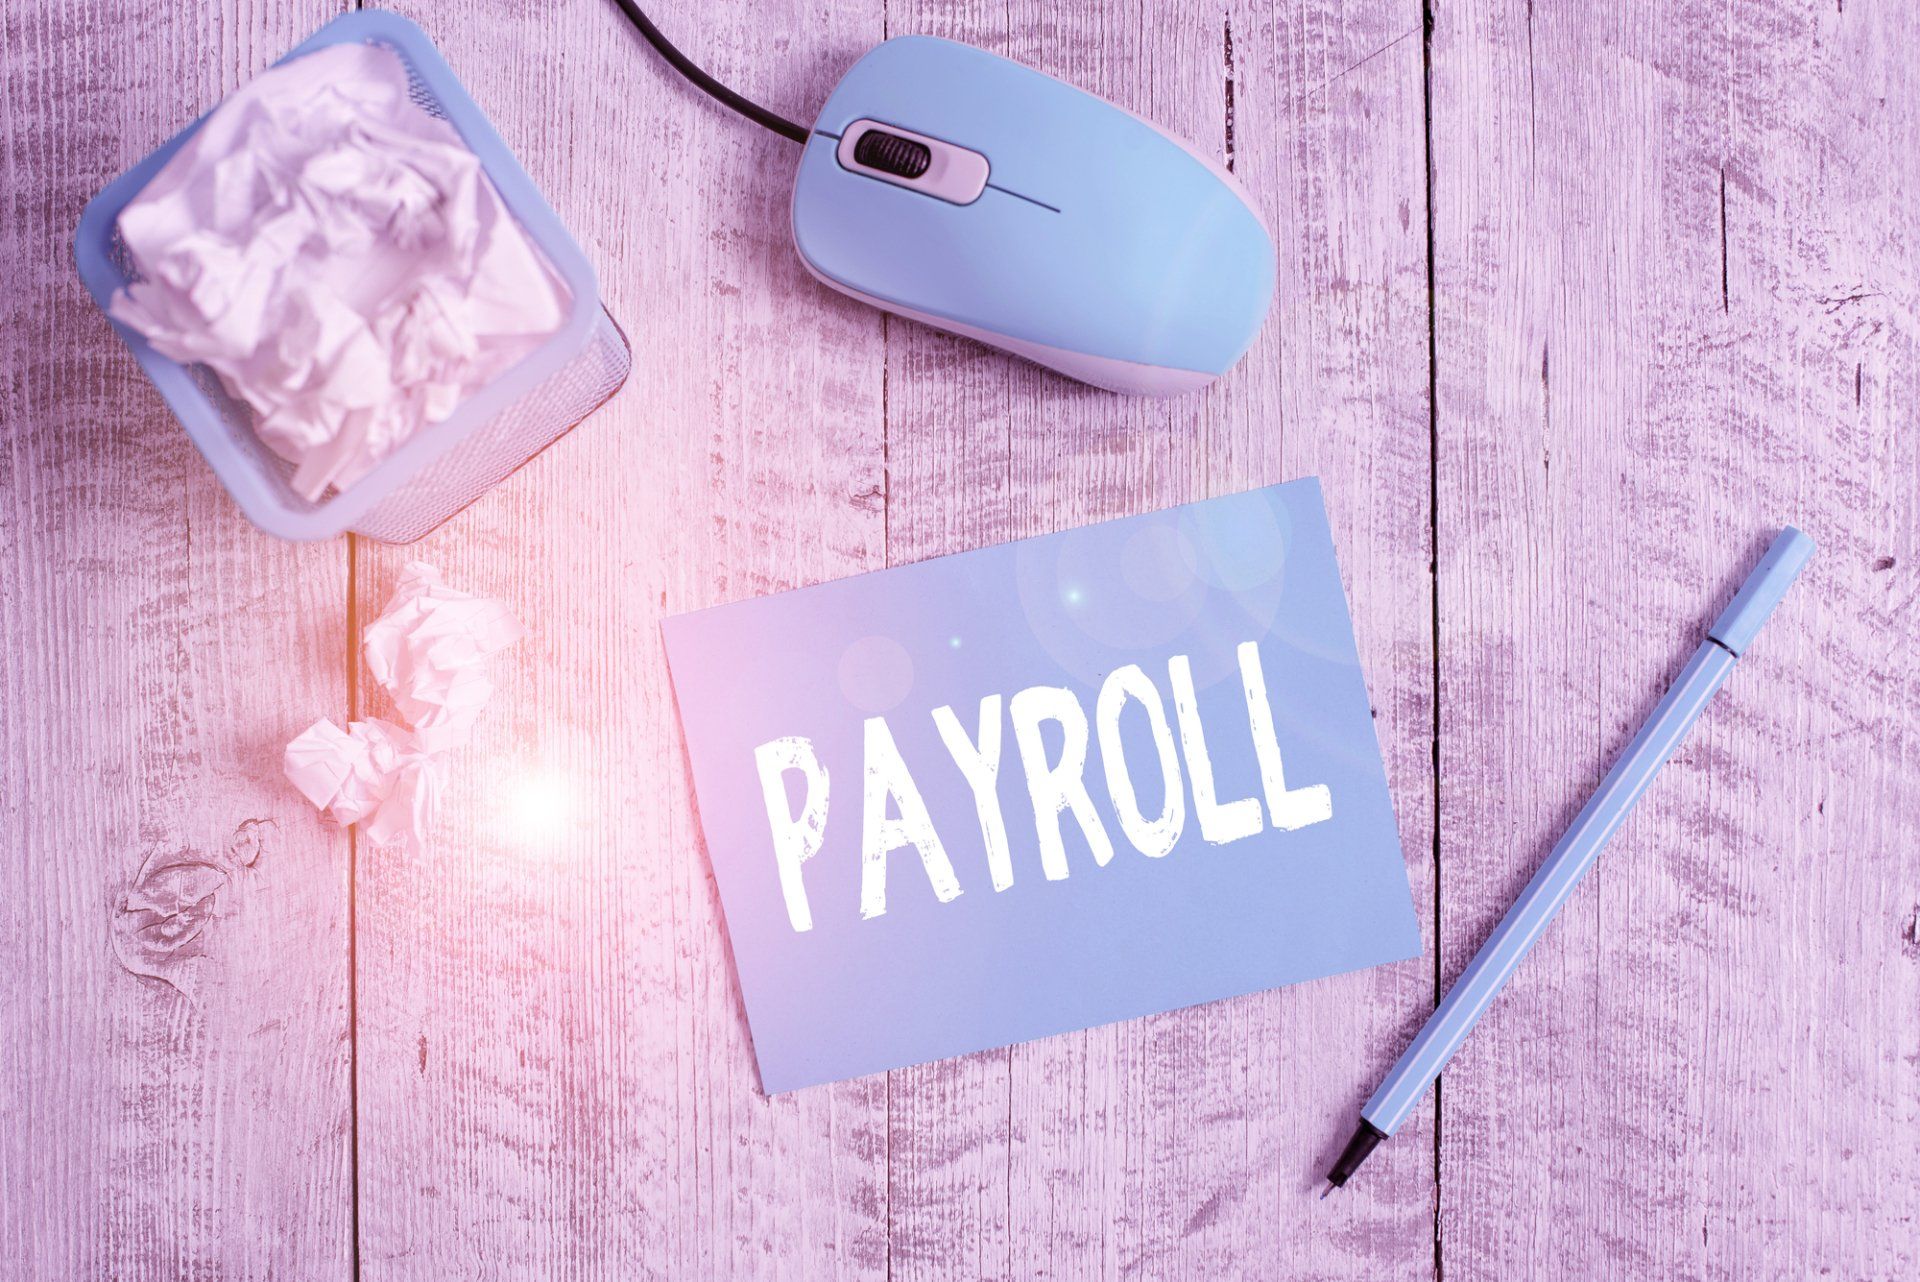 What happens when you run my payroll?